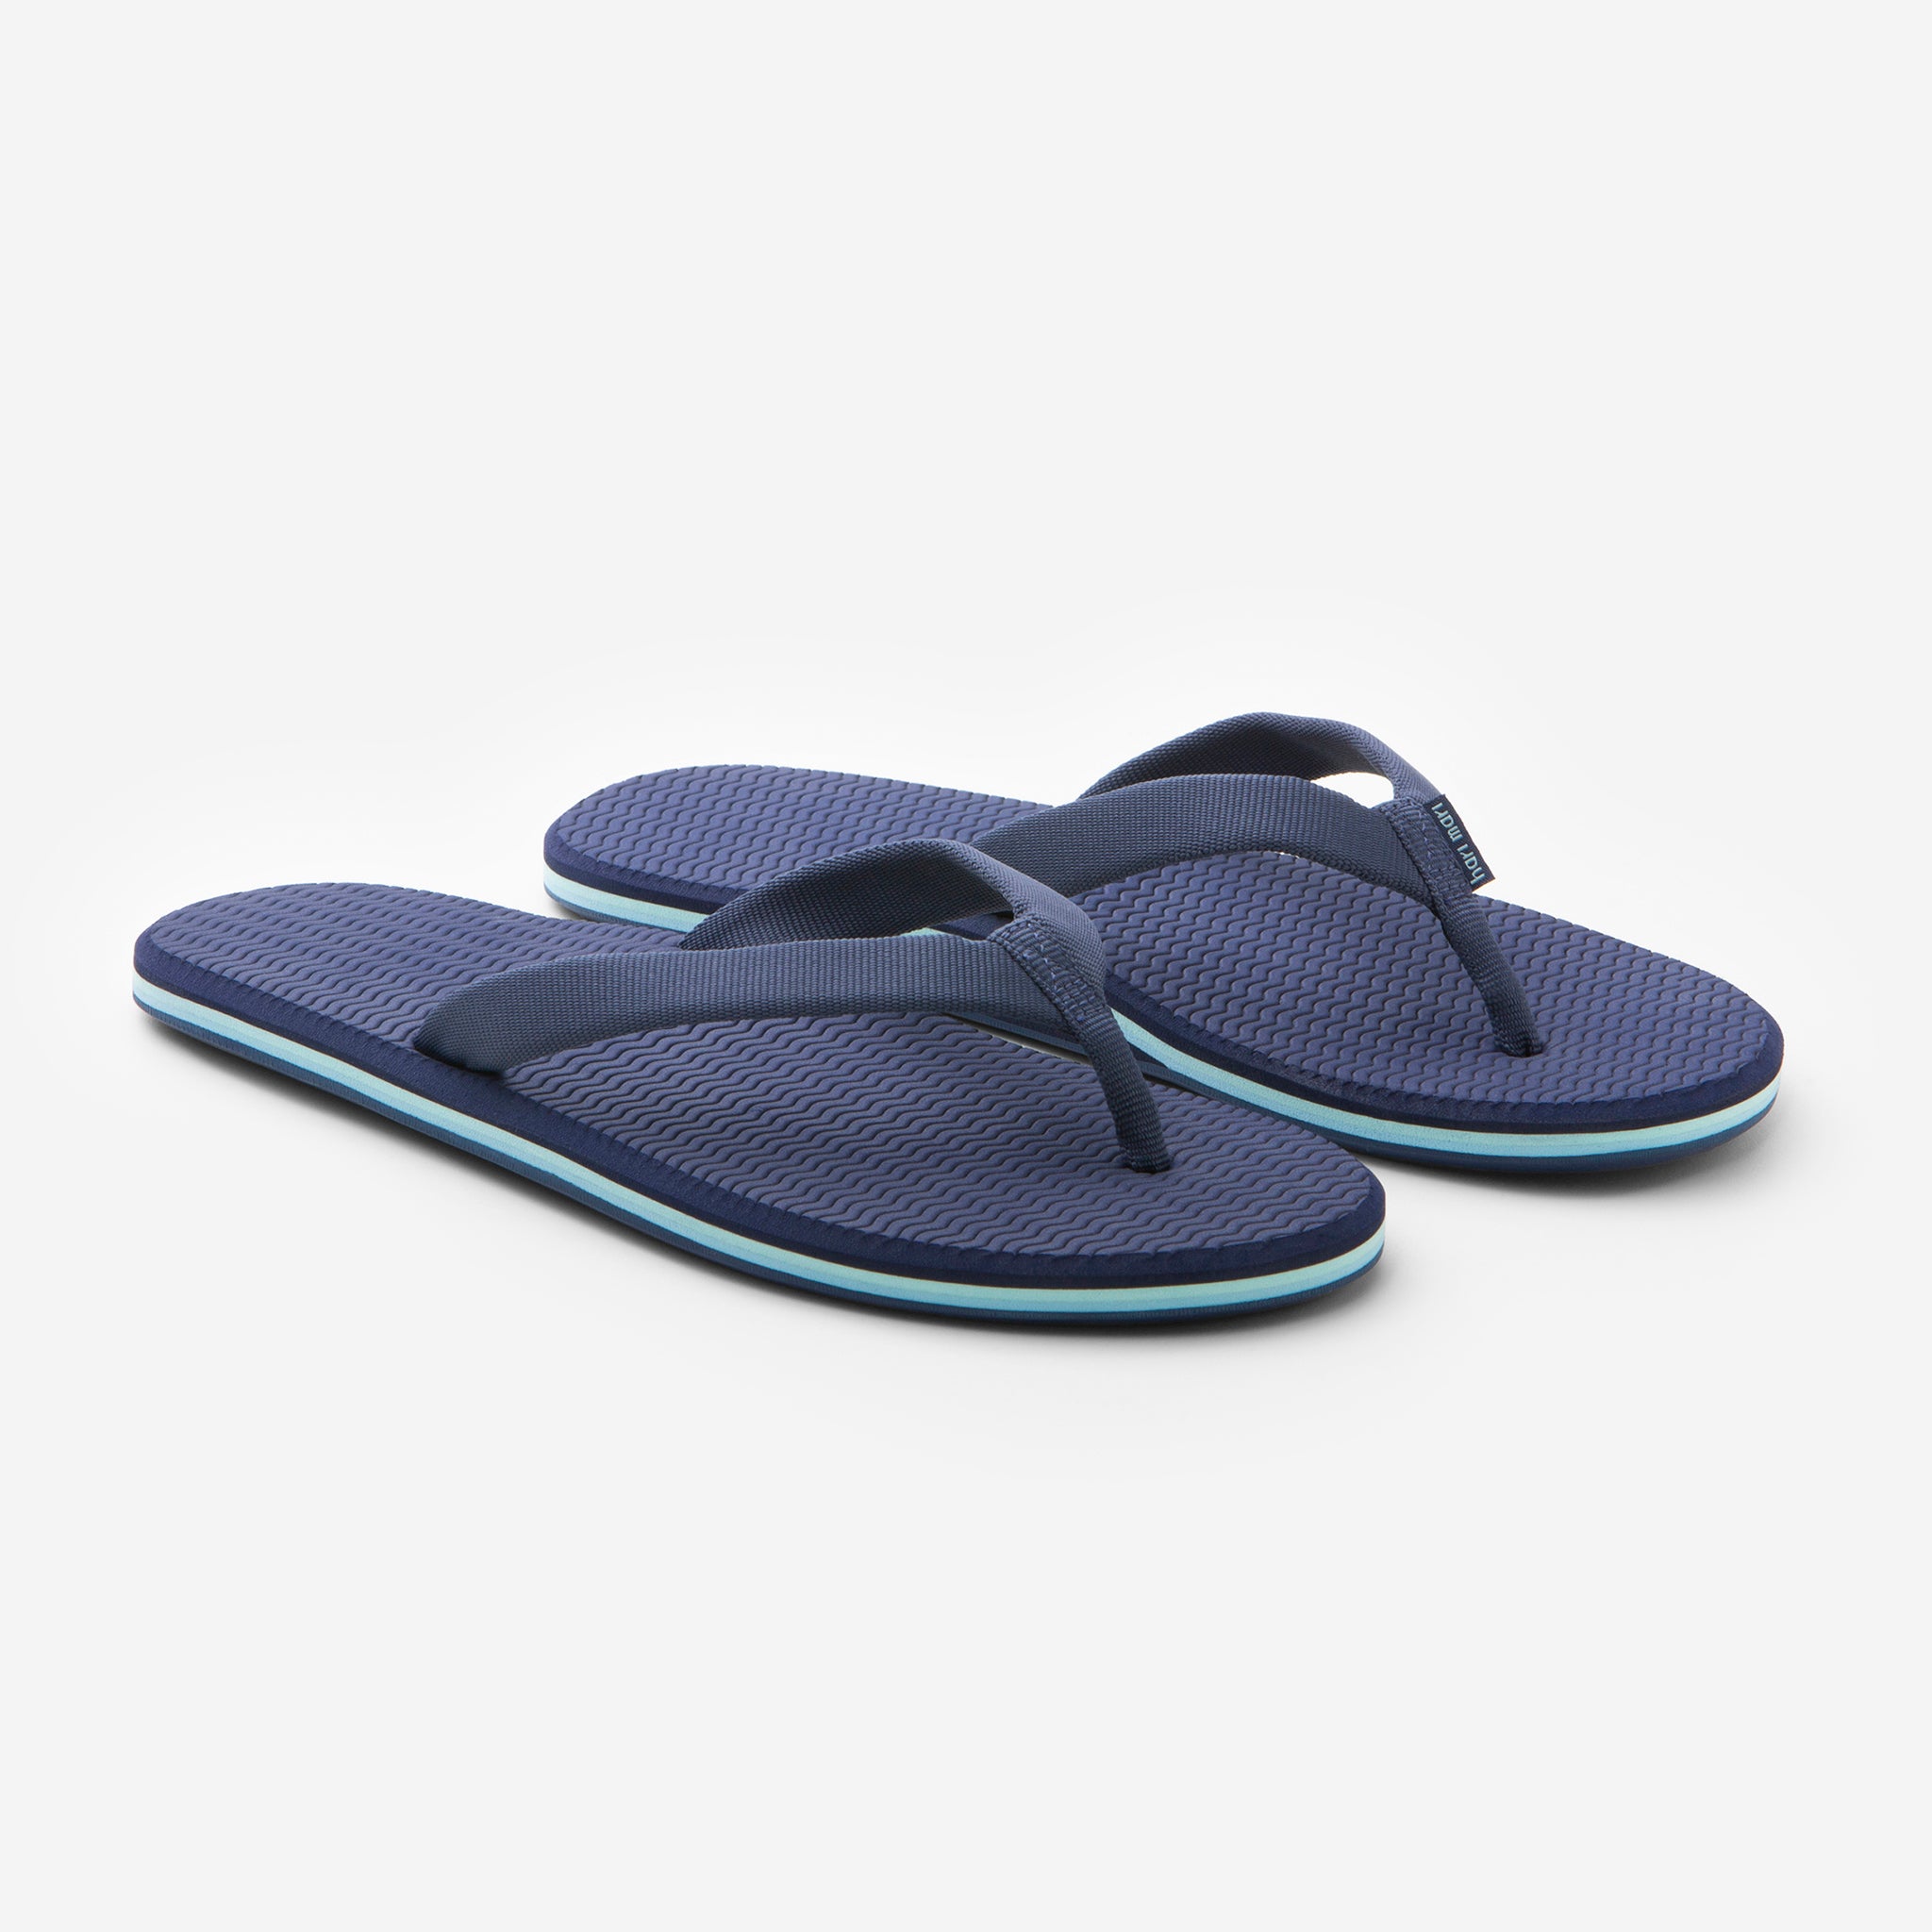 Simply Styled Women's Maxwell Flip-Flop - Navy/Stars & Stripes